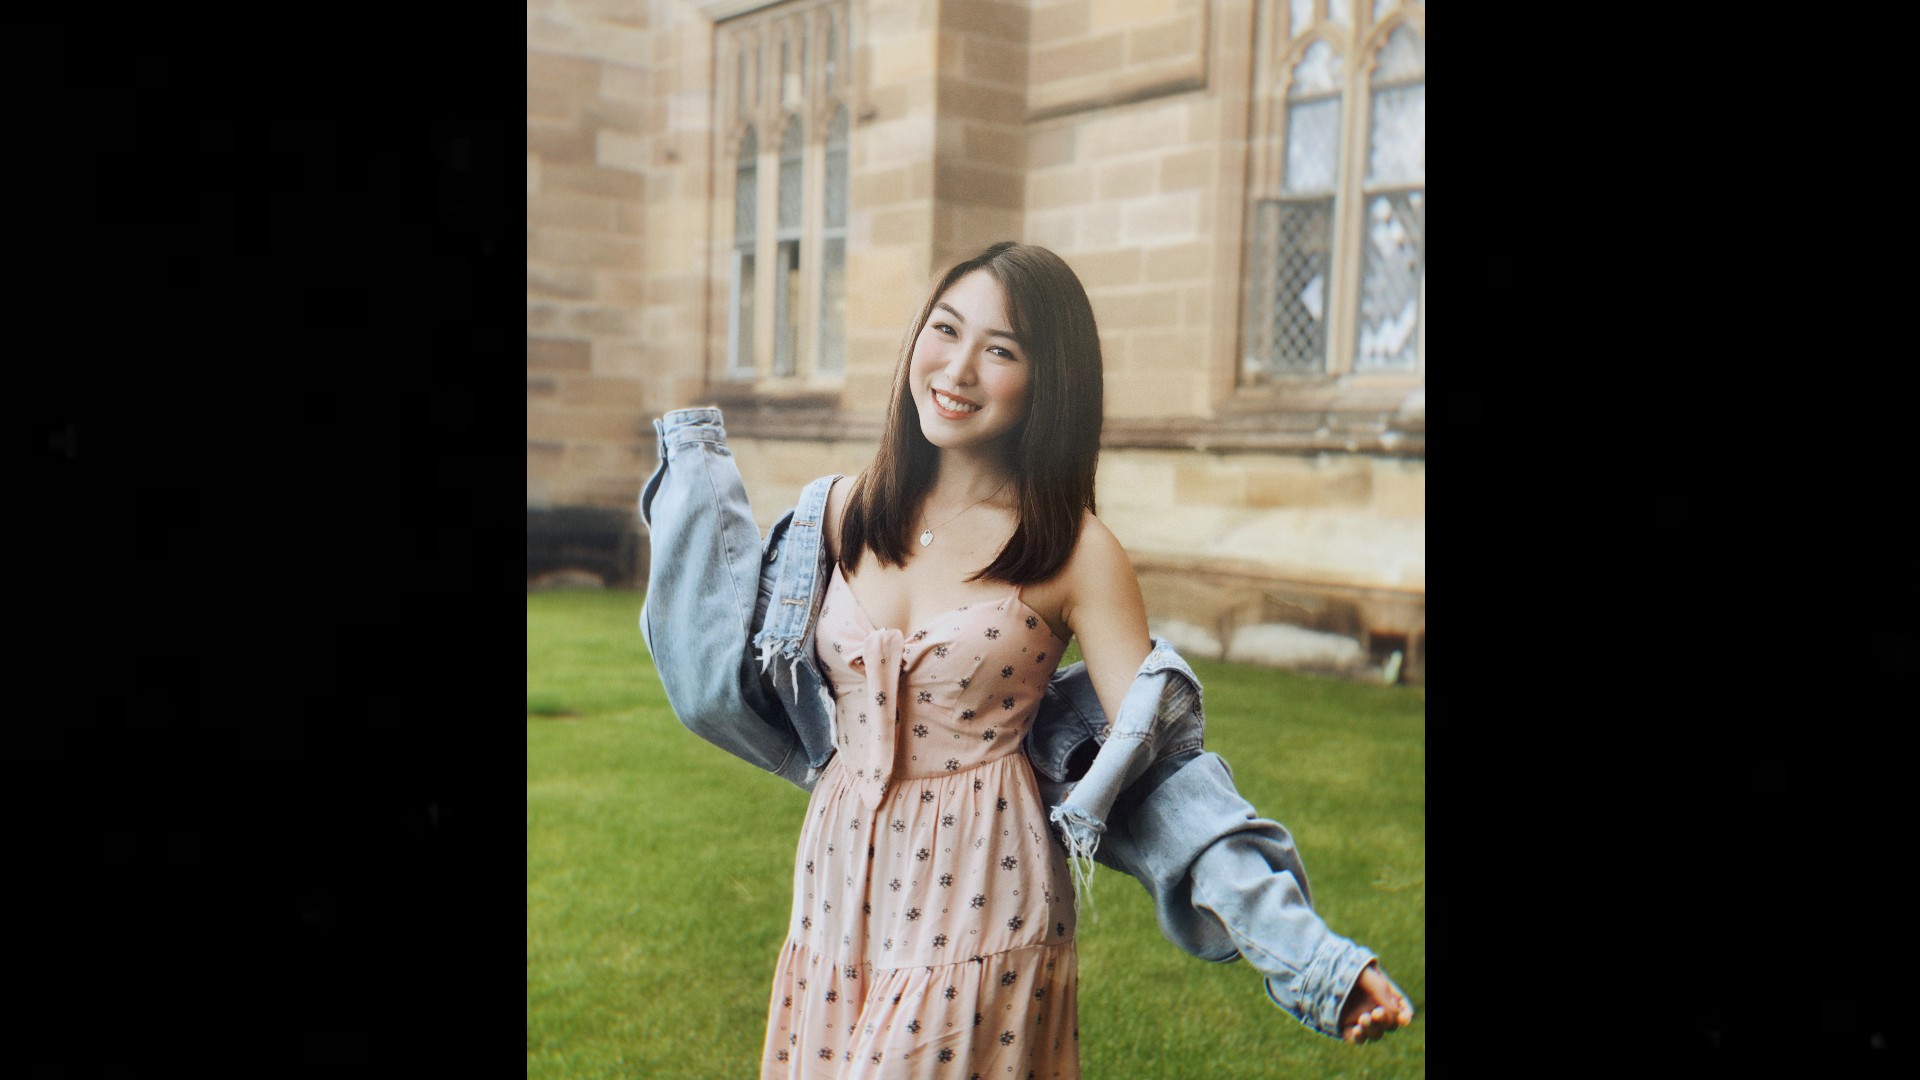 In Feb 2020, Melanis had the chance to go to the University of Sydney via the Student Exchange Programme, with certain expenses offset by the Bursary.